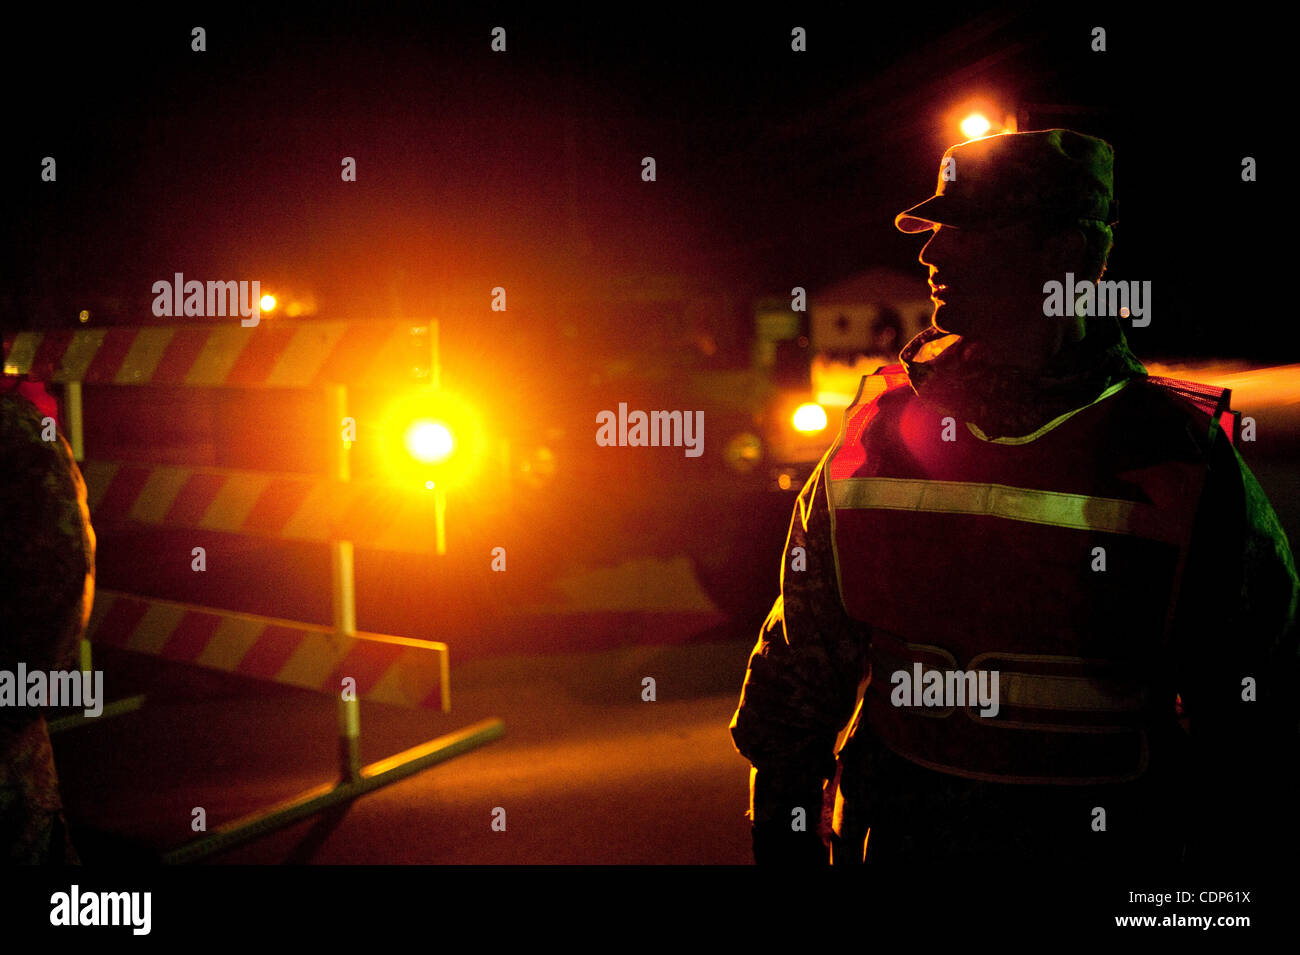 April 27, 2011 - Poplar Bluff, Missouri, U.S. - Private First Class DAKOTAH VERT, waits at a check point on Route 53 on Wednesday night. Checkpoints were set to reduce looting and to keep people out of dangerously flooded areas. Vert struggled with boredom during his 12 plus hour shift. (Credit Imag Stock Photo